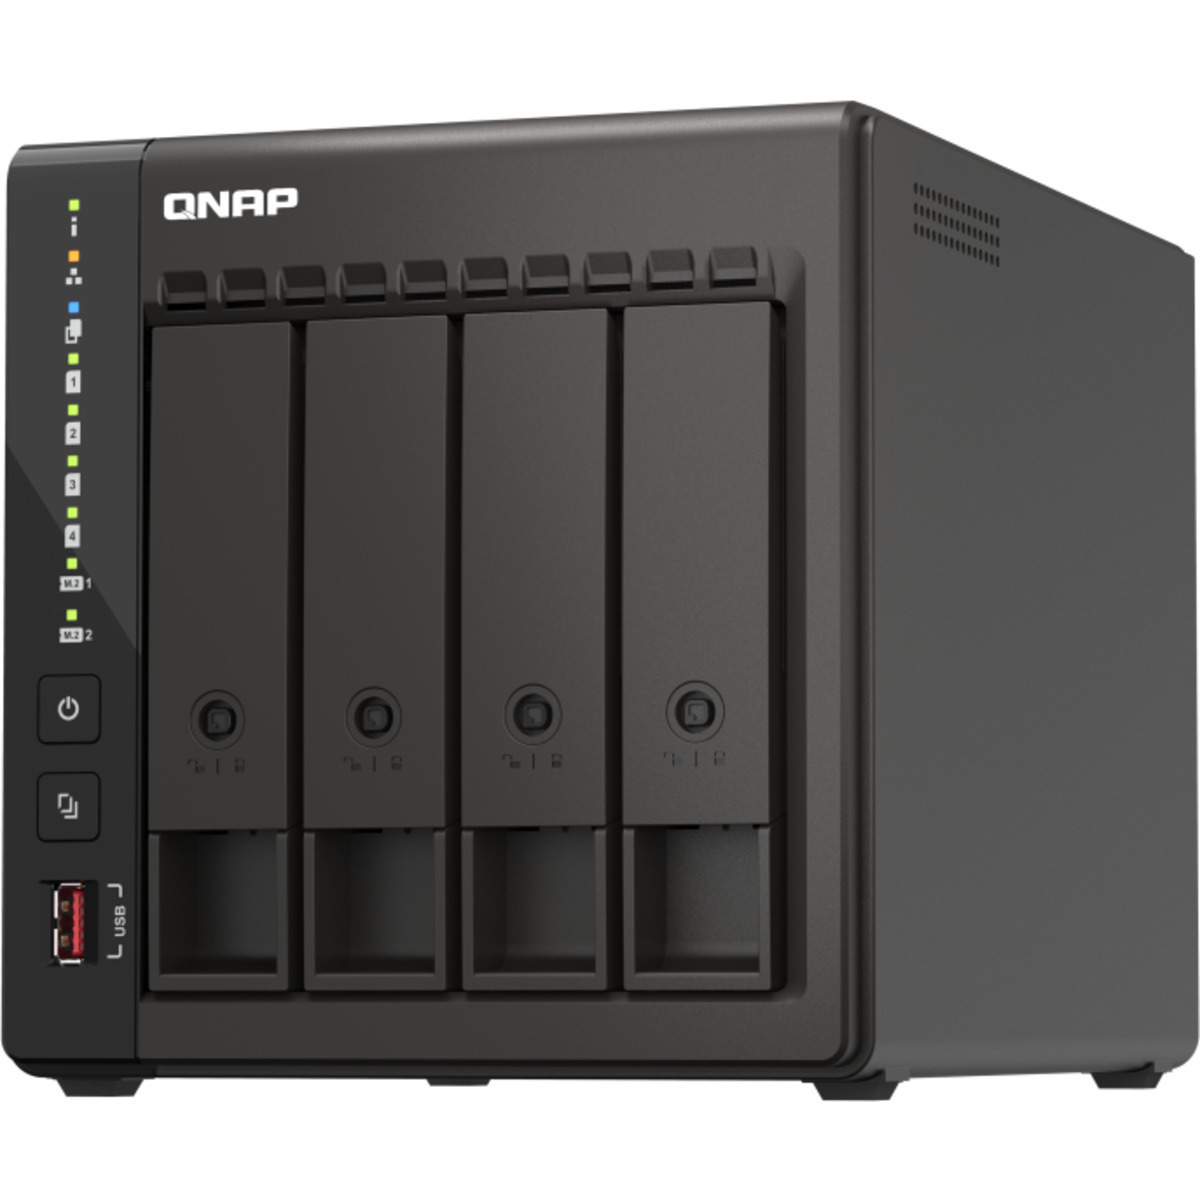 buy QNAP TS-453E 16tb Desktop NAS - Network Attached Storage Device 4x4000gb Samsung 870 EVO MZ-77E4T0BAM 2.5 560/530MB/s SATA 6Gb/s SSD CONSUMER Class Drives Installed - Burn-In Tested - nas headquarters buy network attached storage server device das new raid-5 free shipping usa spring sale TS-453E